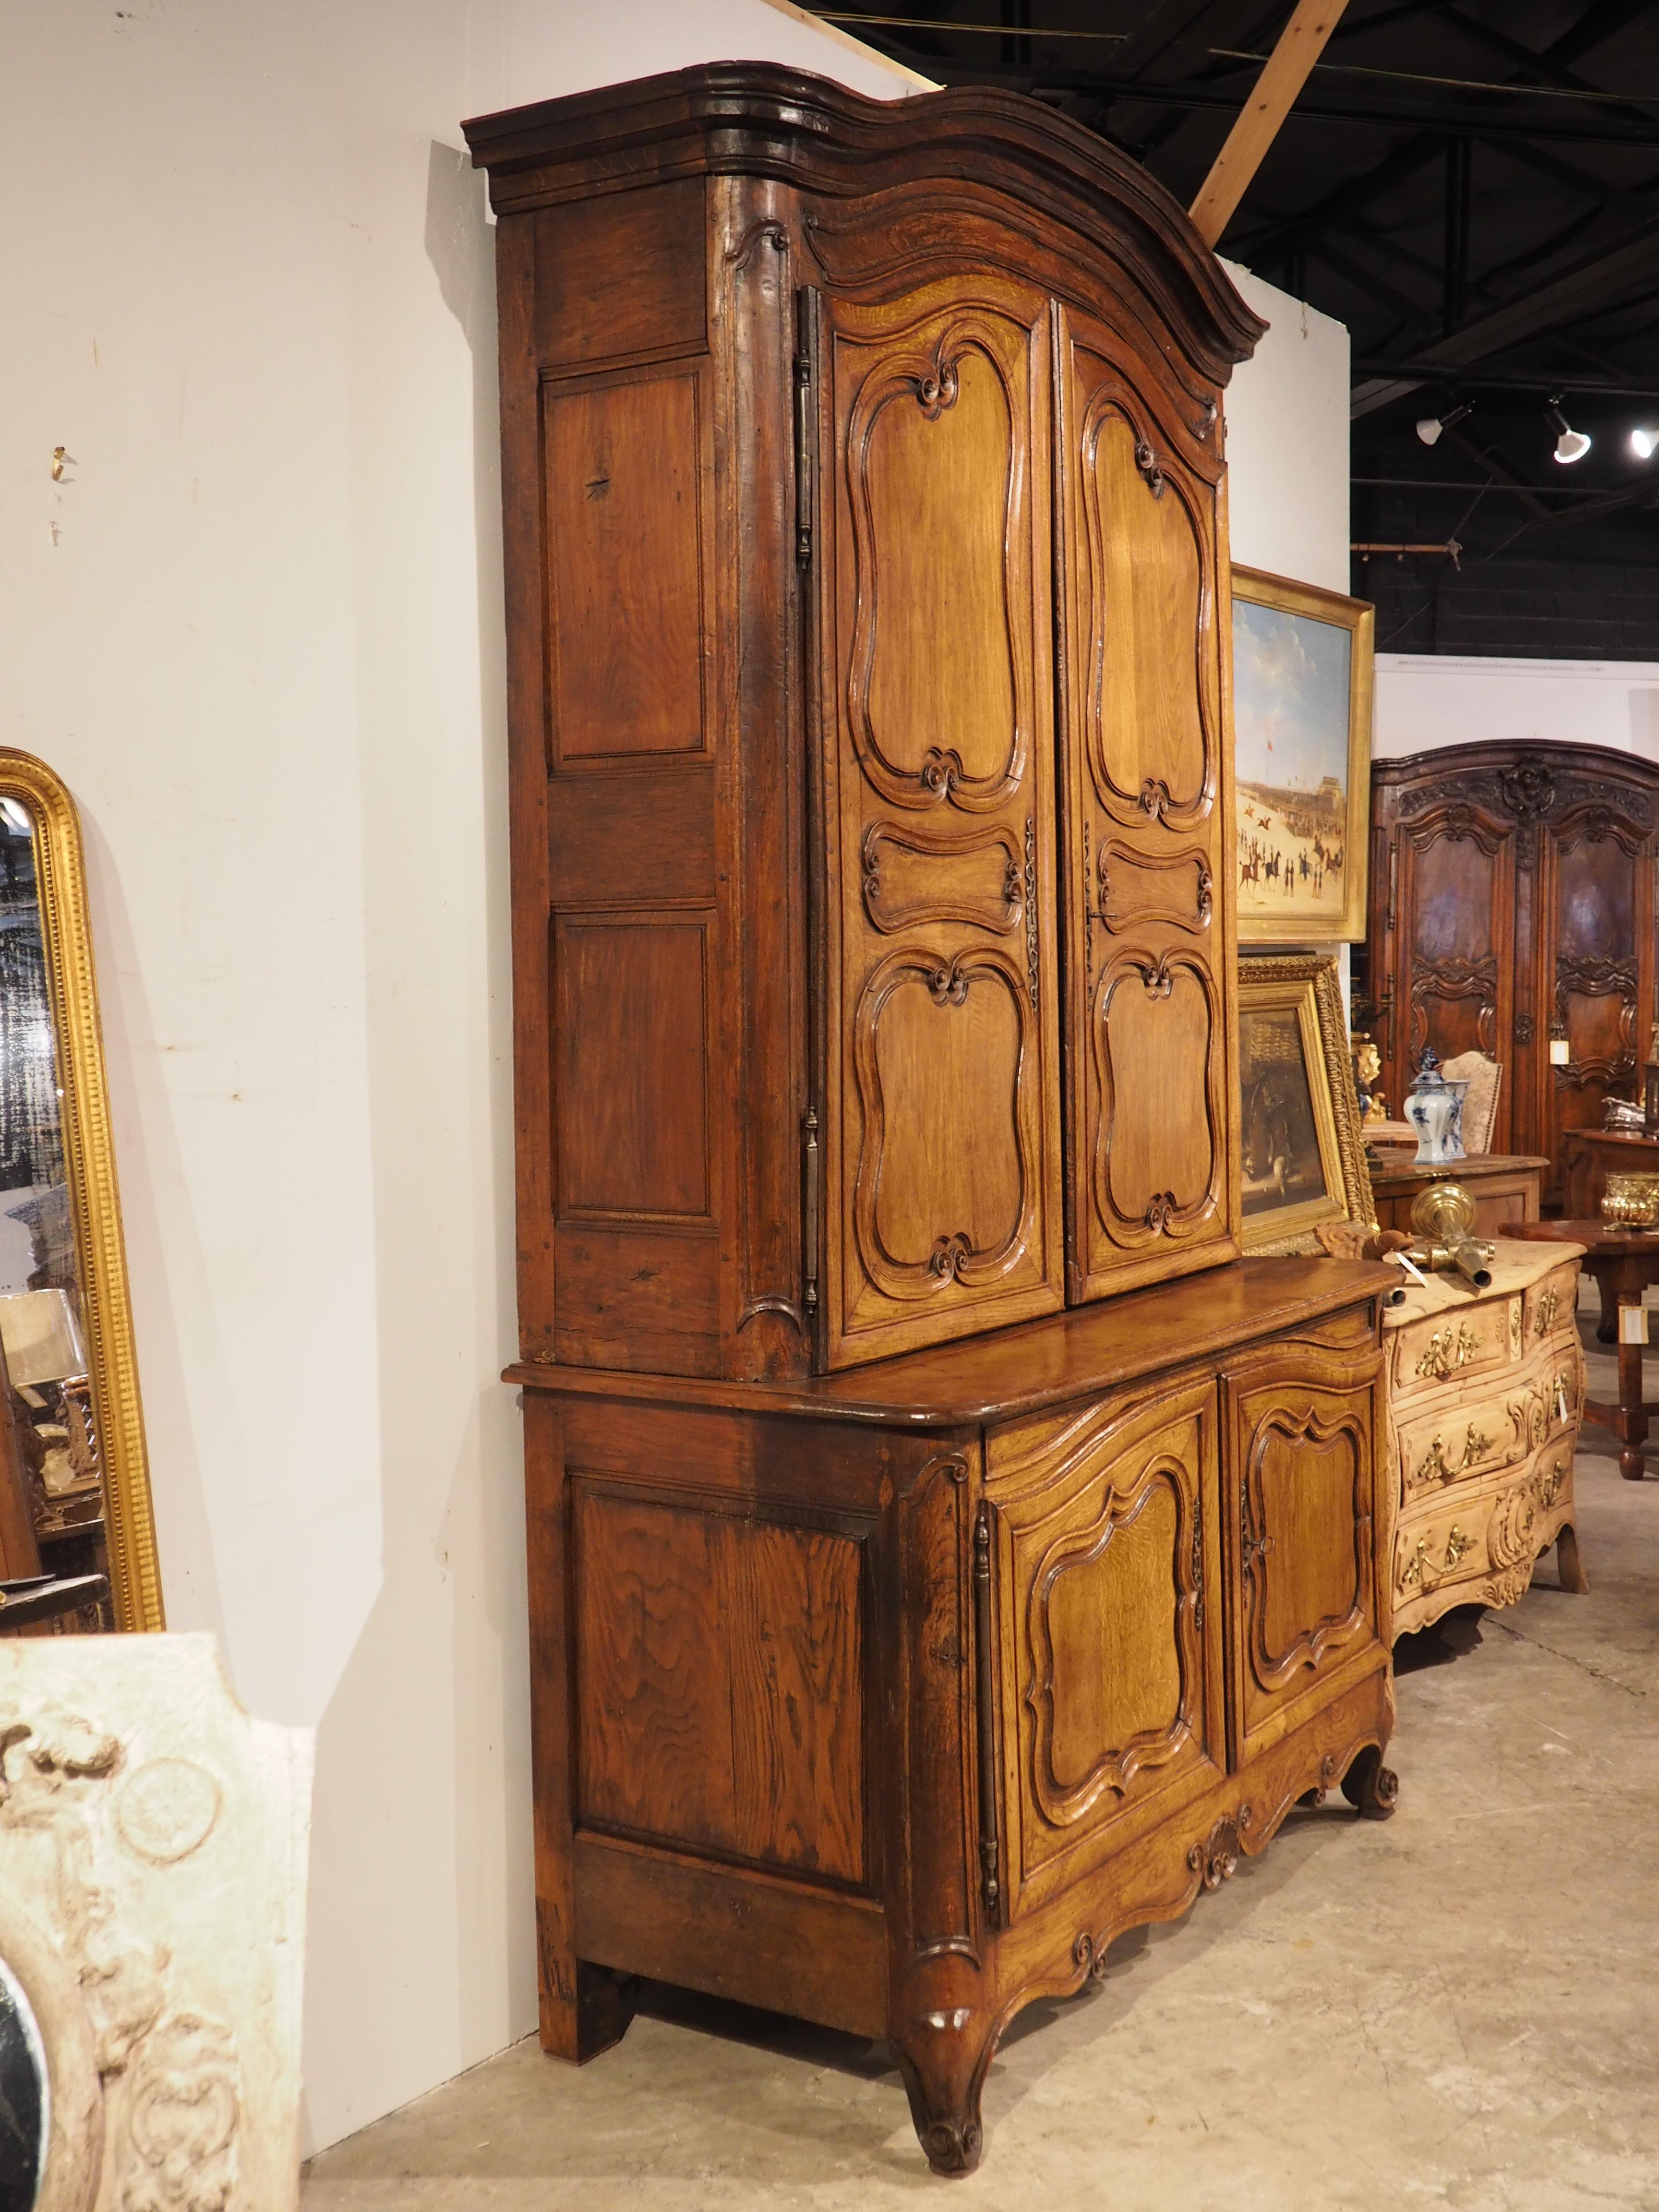 A Grand 18th Century French Oak Buffet Deux Corps from the Perche Region For Sale 8